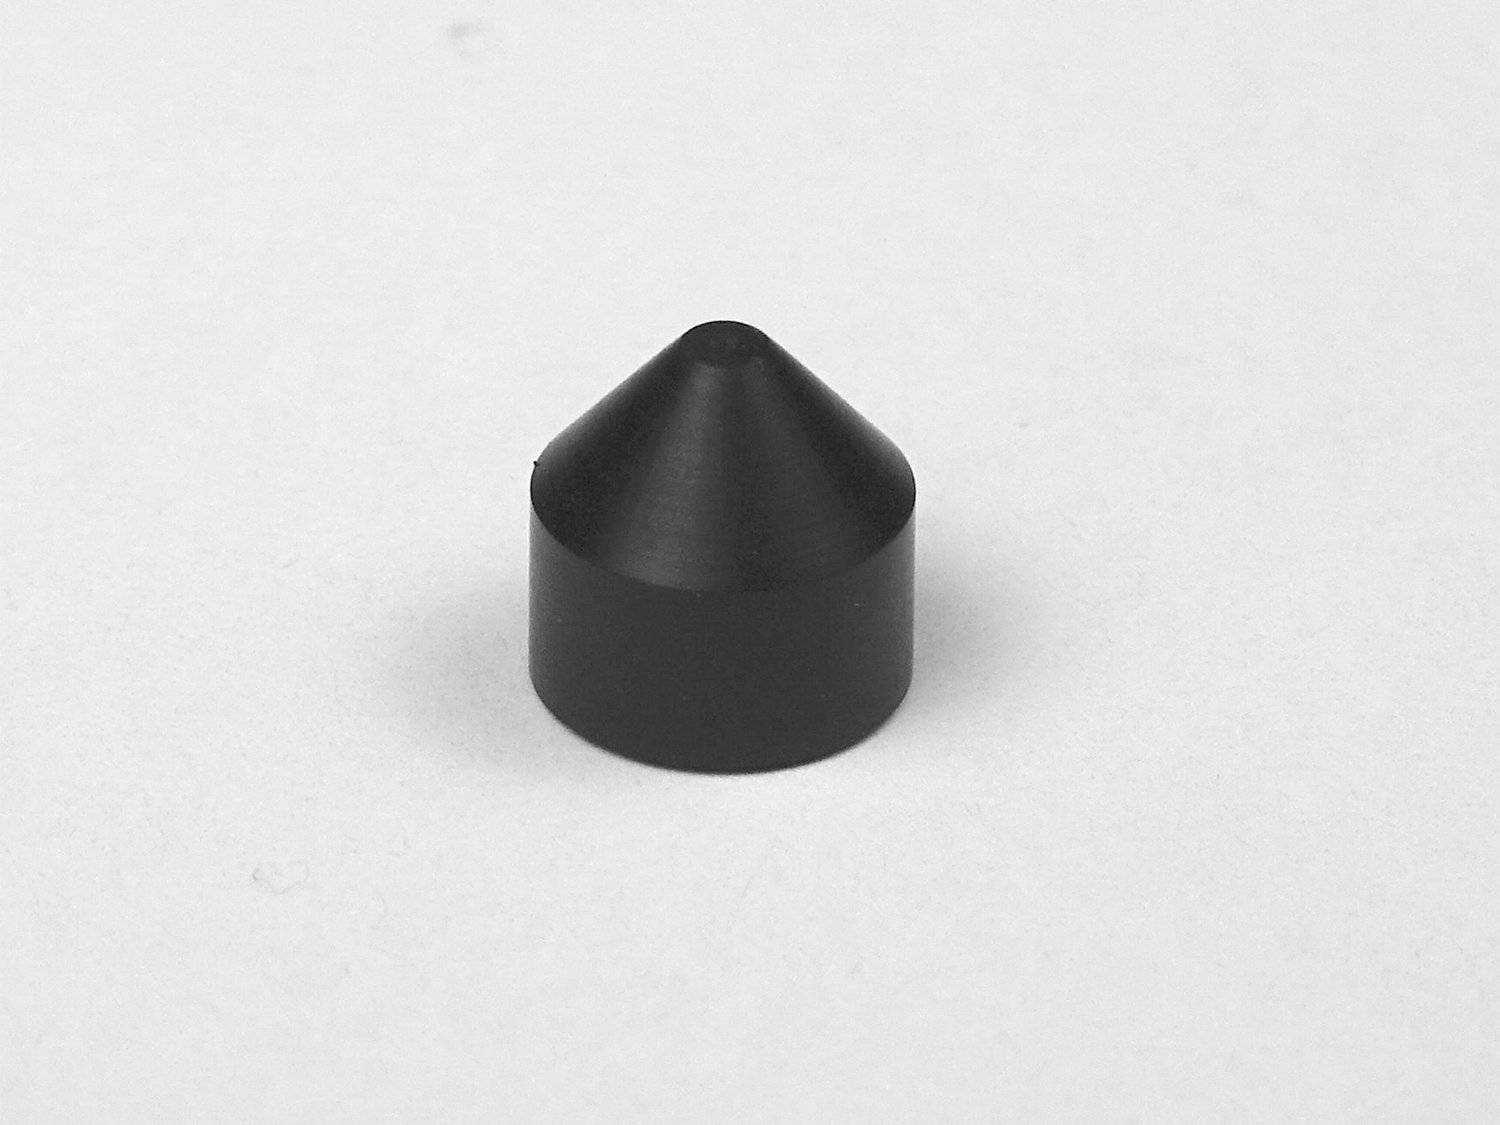 Shubb Replacement Delrin cap for Original and Lite capos.